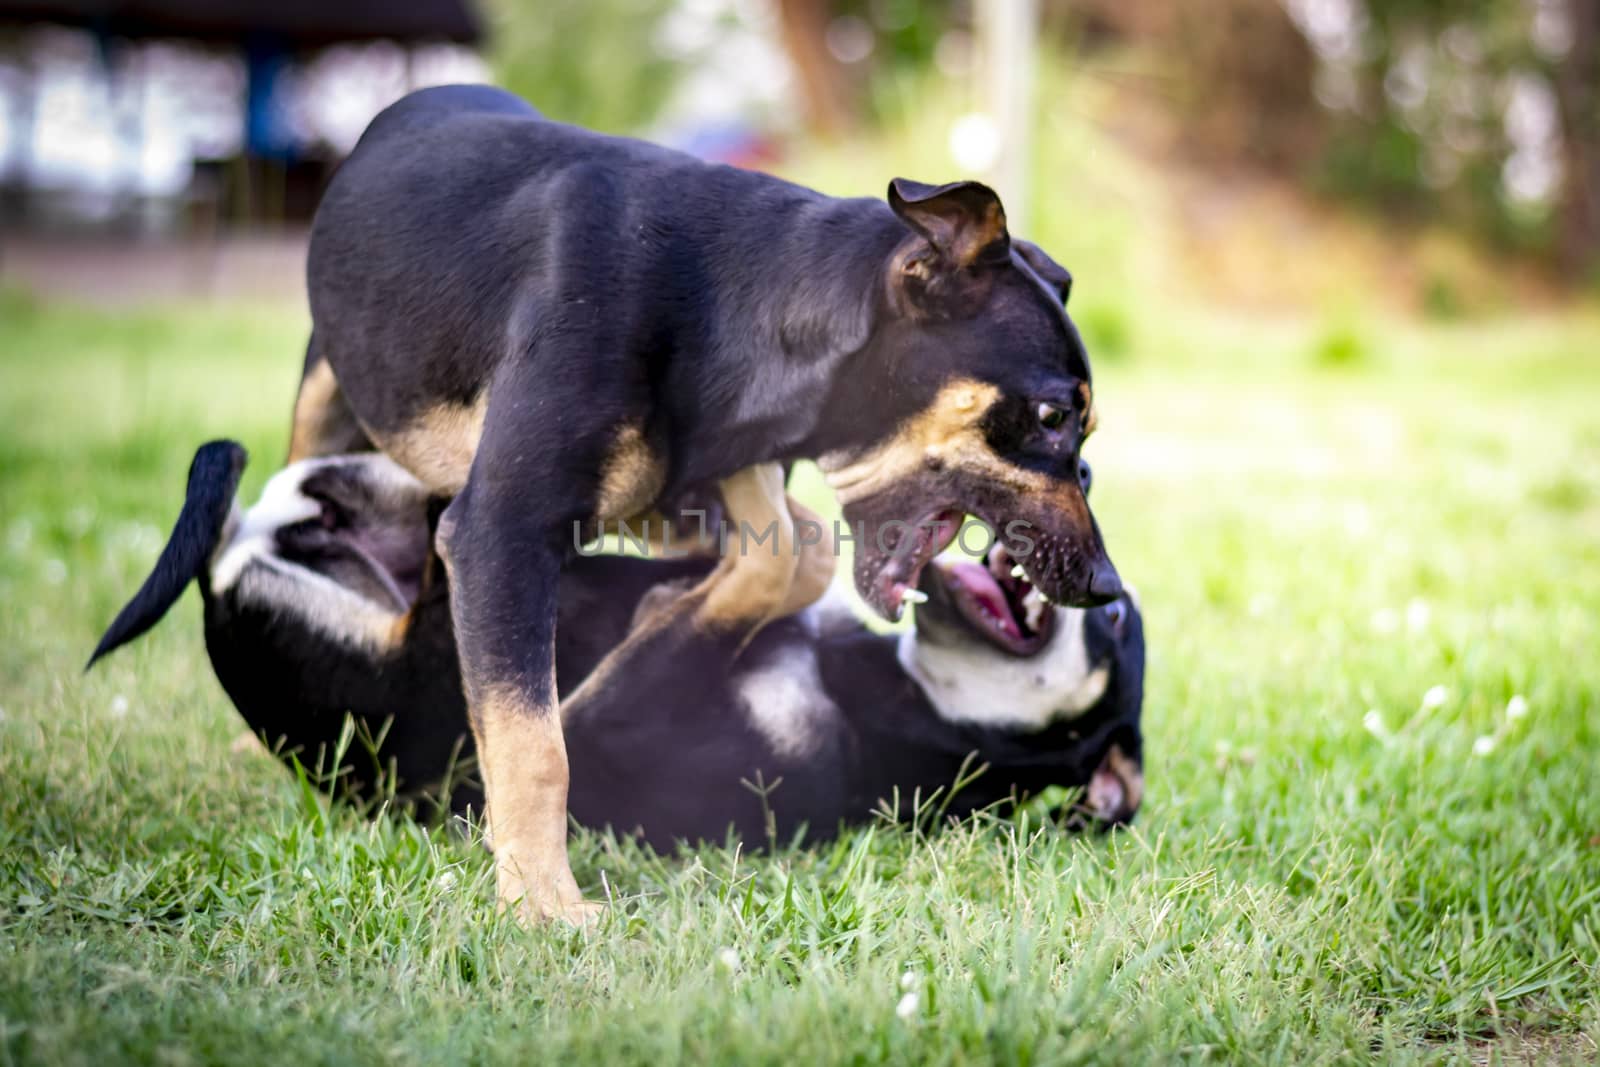 Two playful Beauceron dogs playing in the grass, on on top of the other by kb79